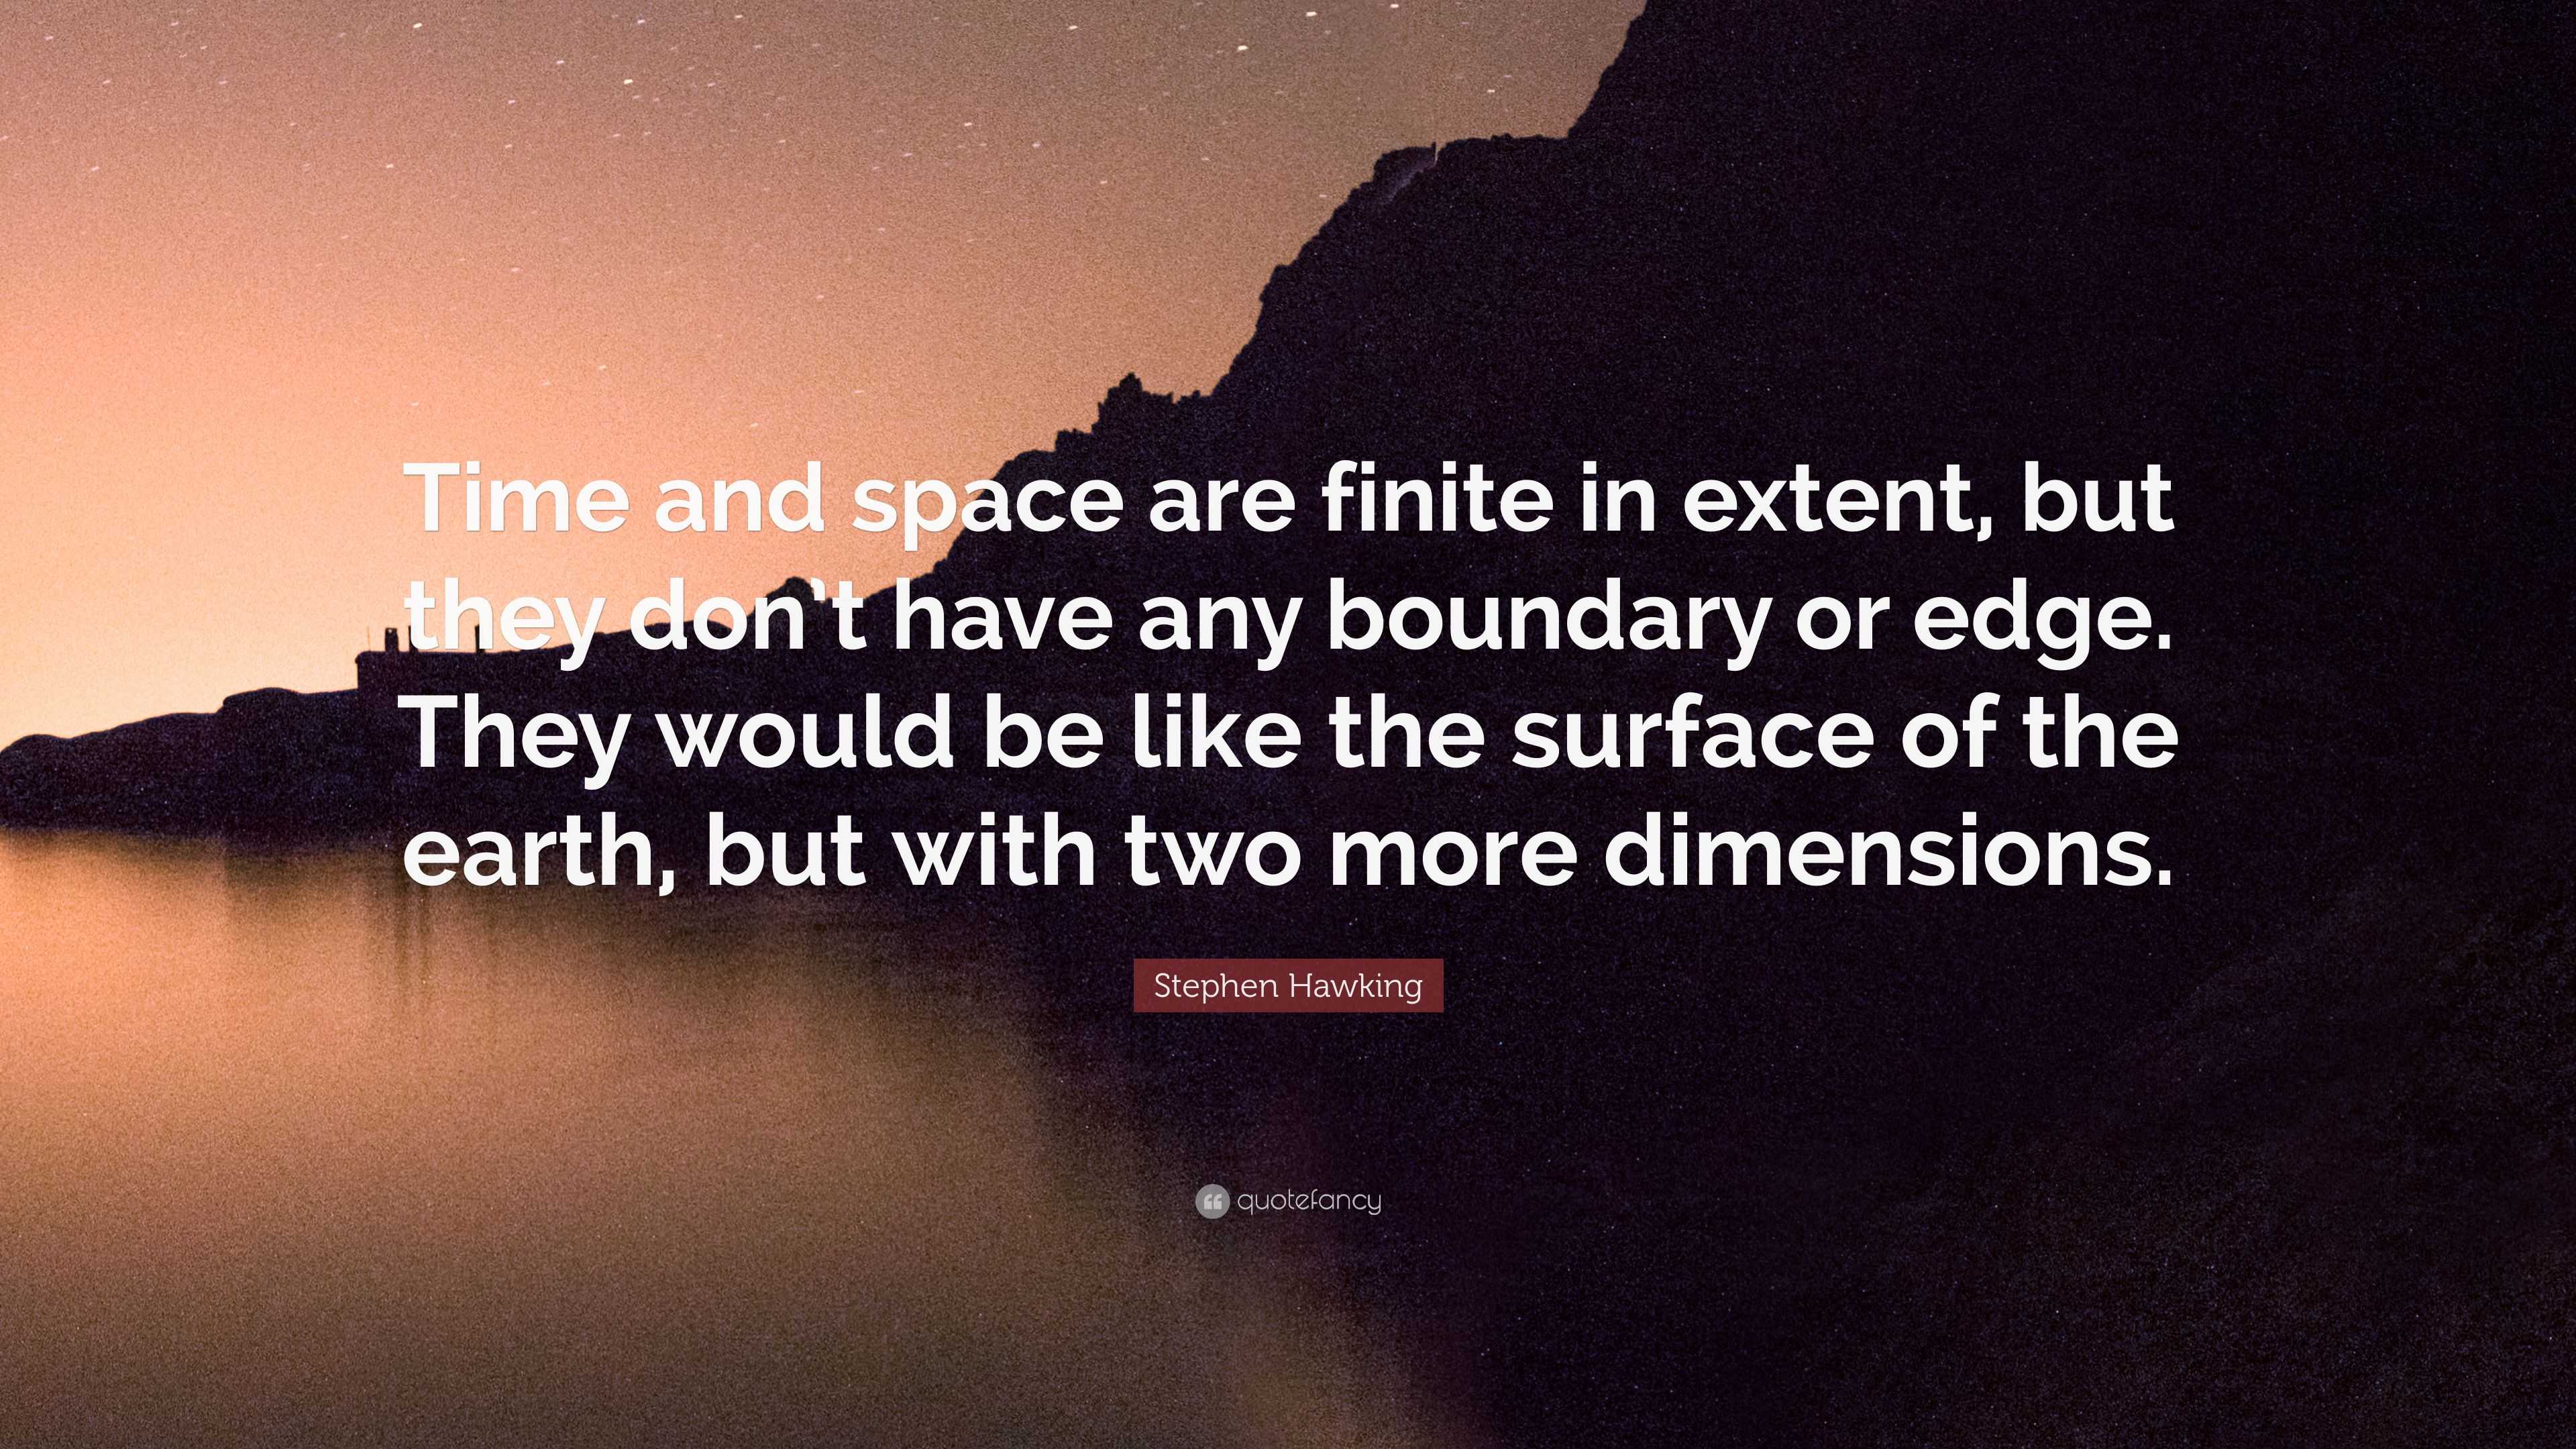 Stephen Hawking Quote “Time and space are finite in extent but they don